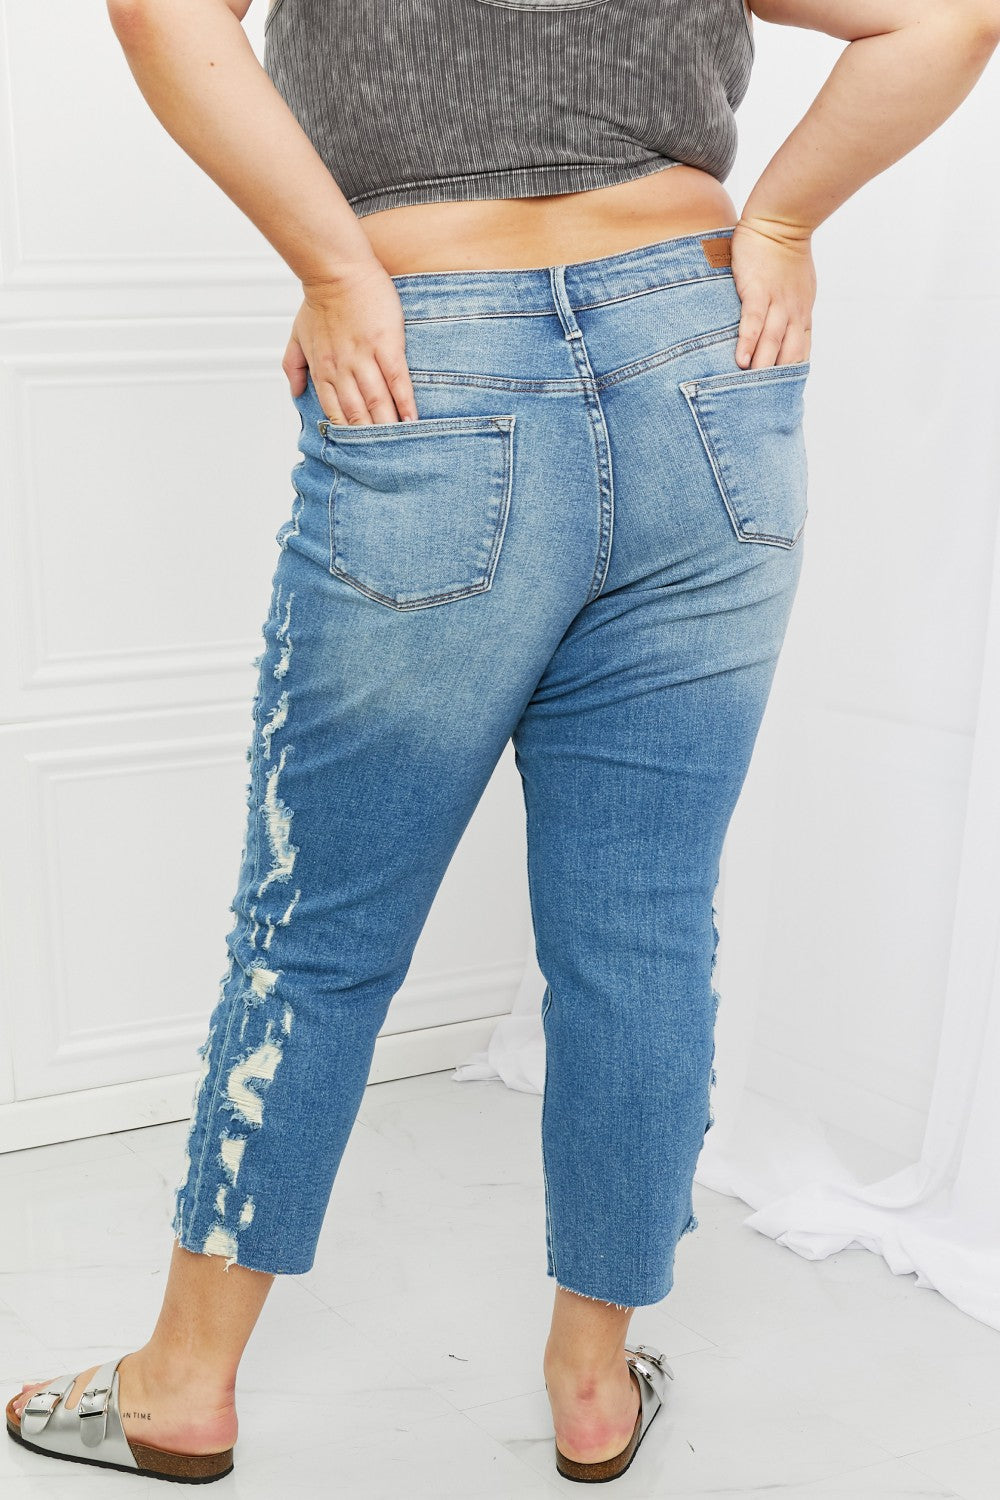 Judy Blue Straight Leg Distressed Jeans - AnnRose Boutique